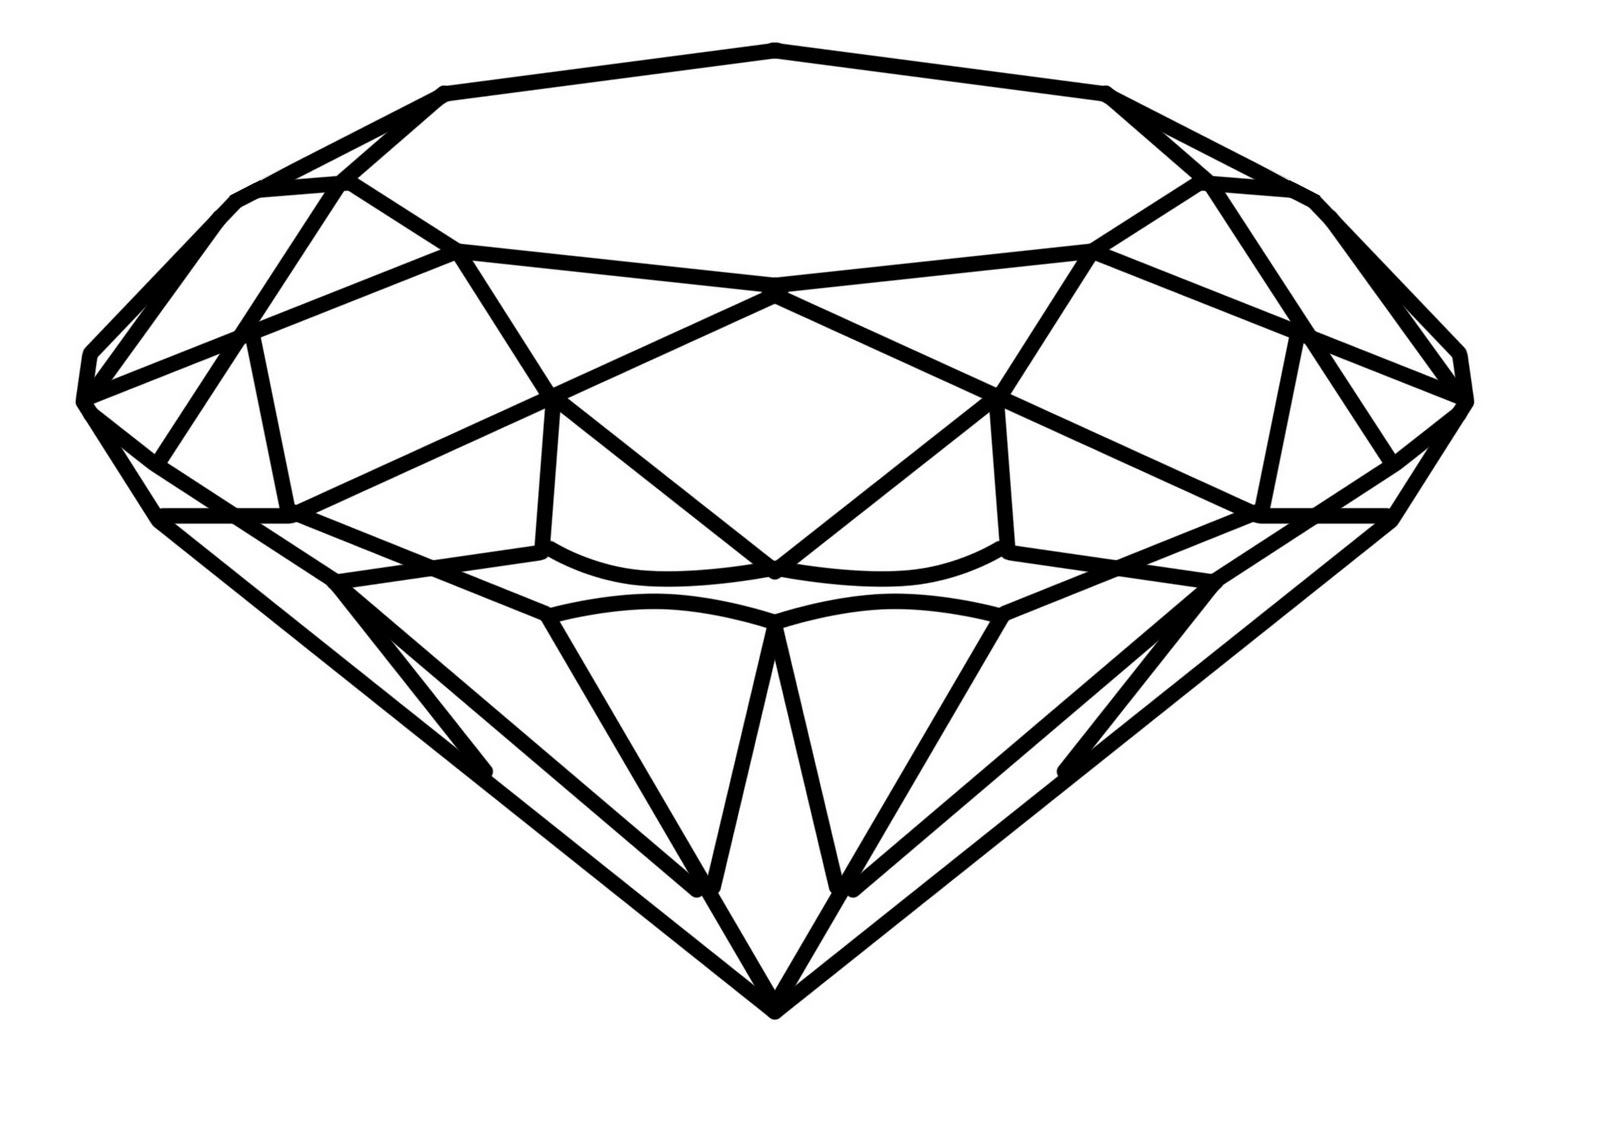 24 Diamond Drawing Free Cliparts That You Can Download To You Computer